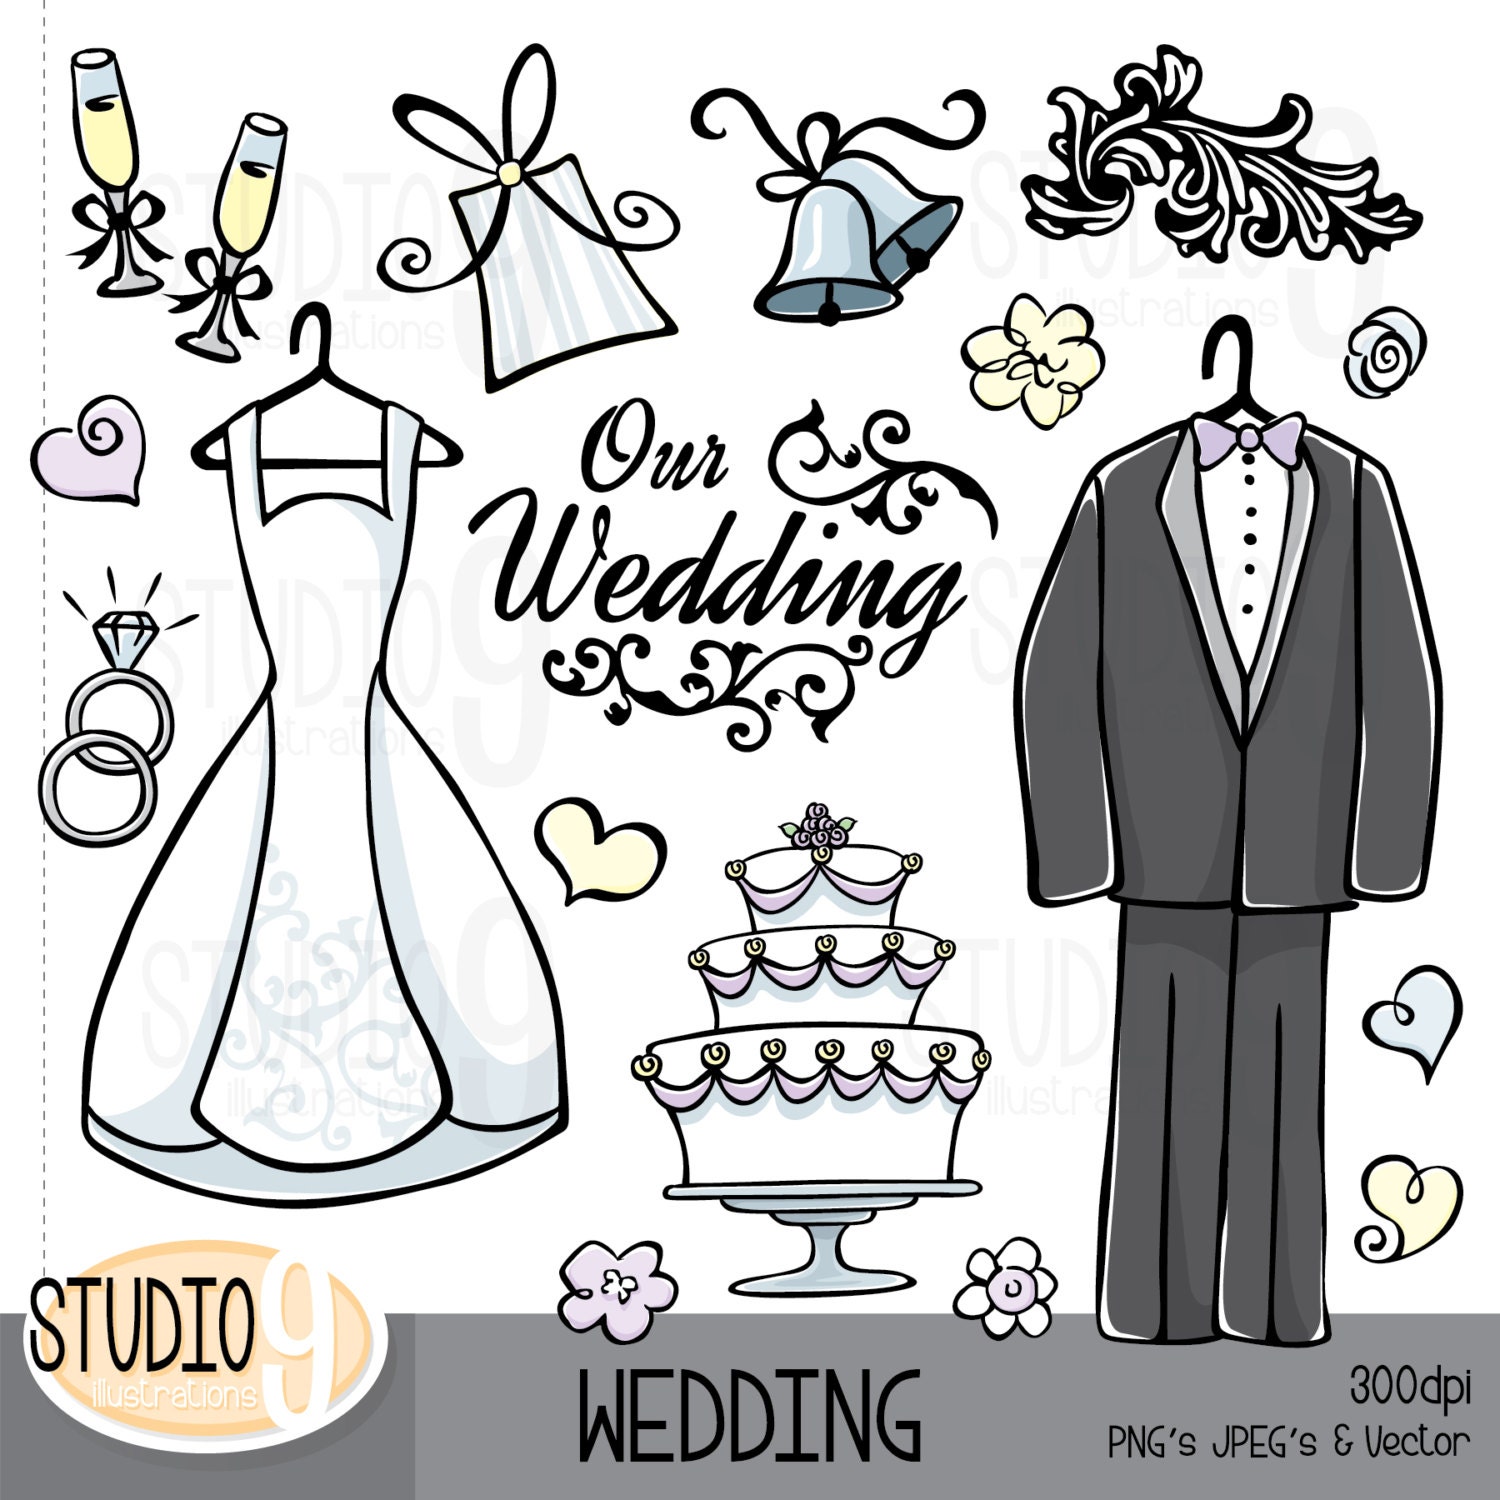 download clipart wedding - photo #39